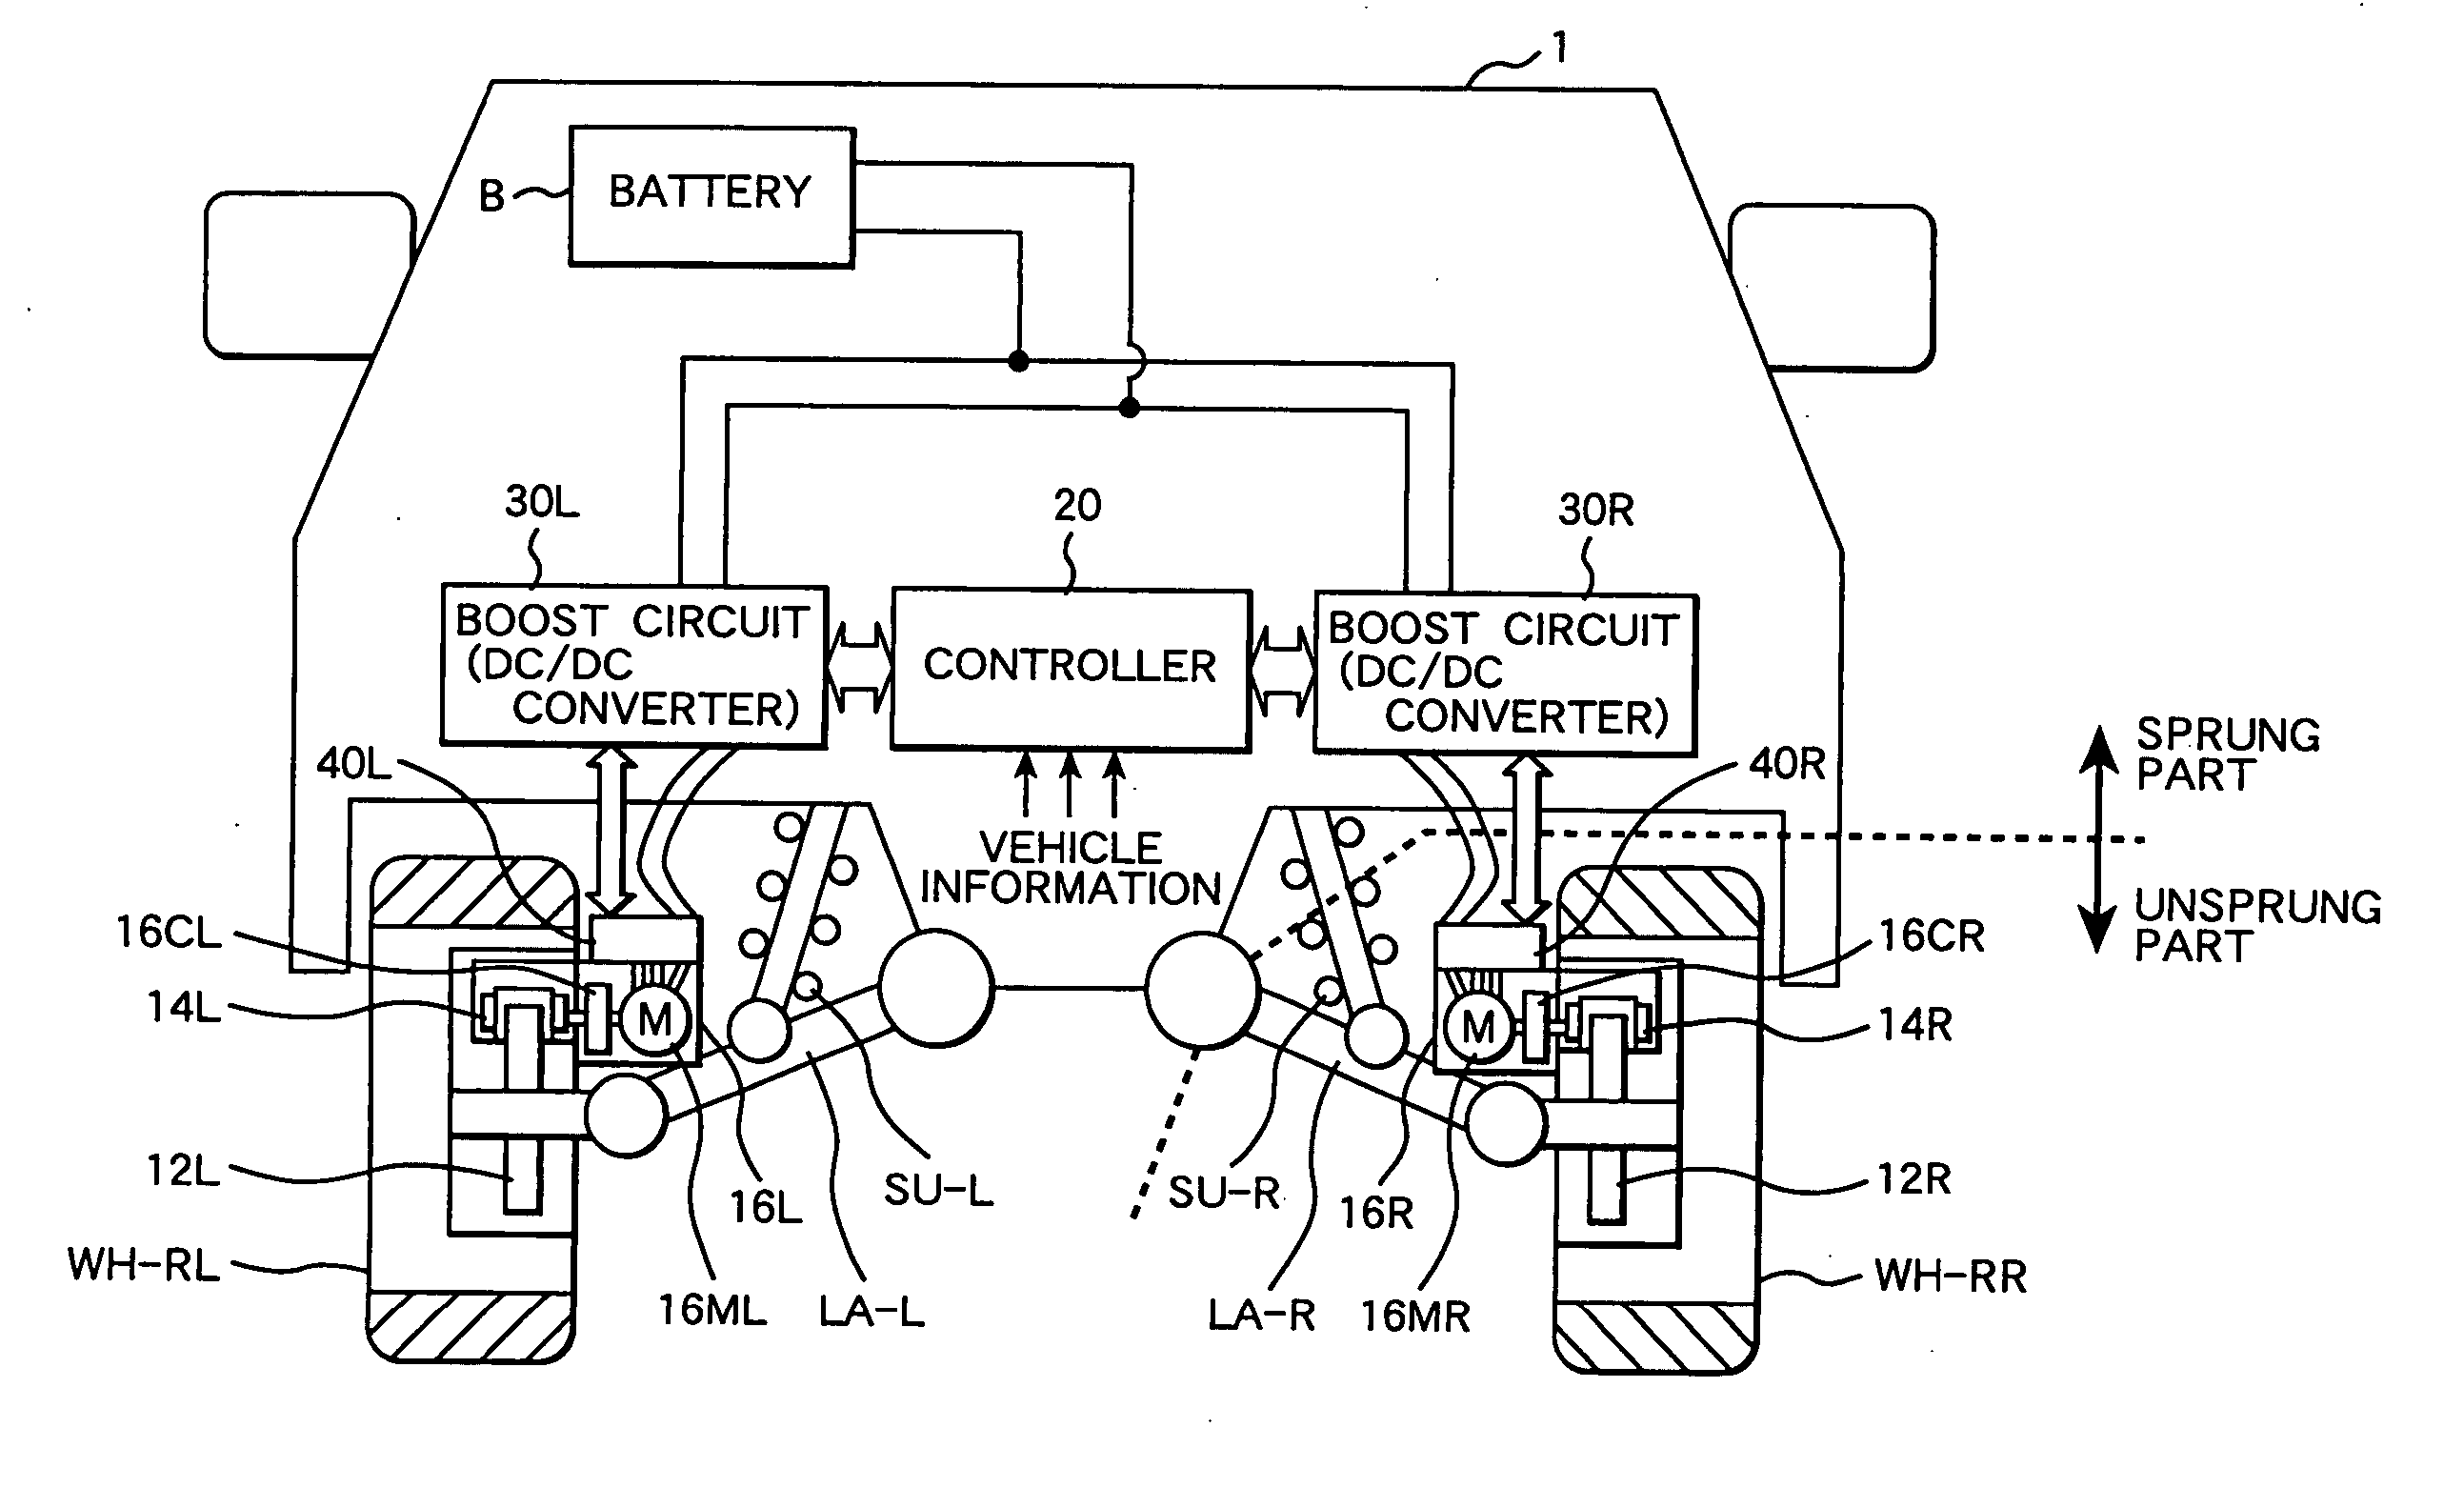 Motor system for vehicle